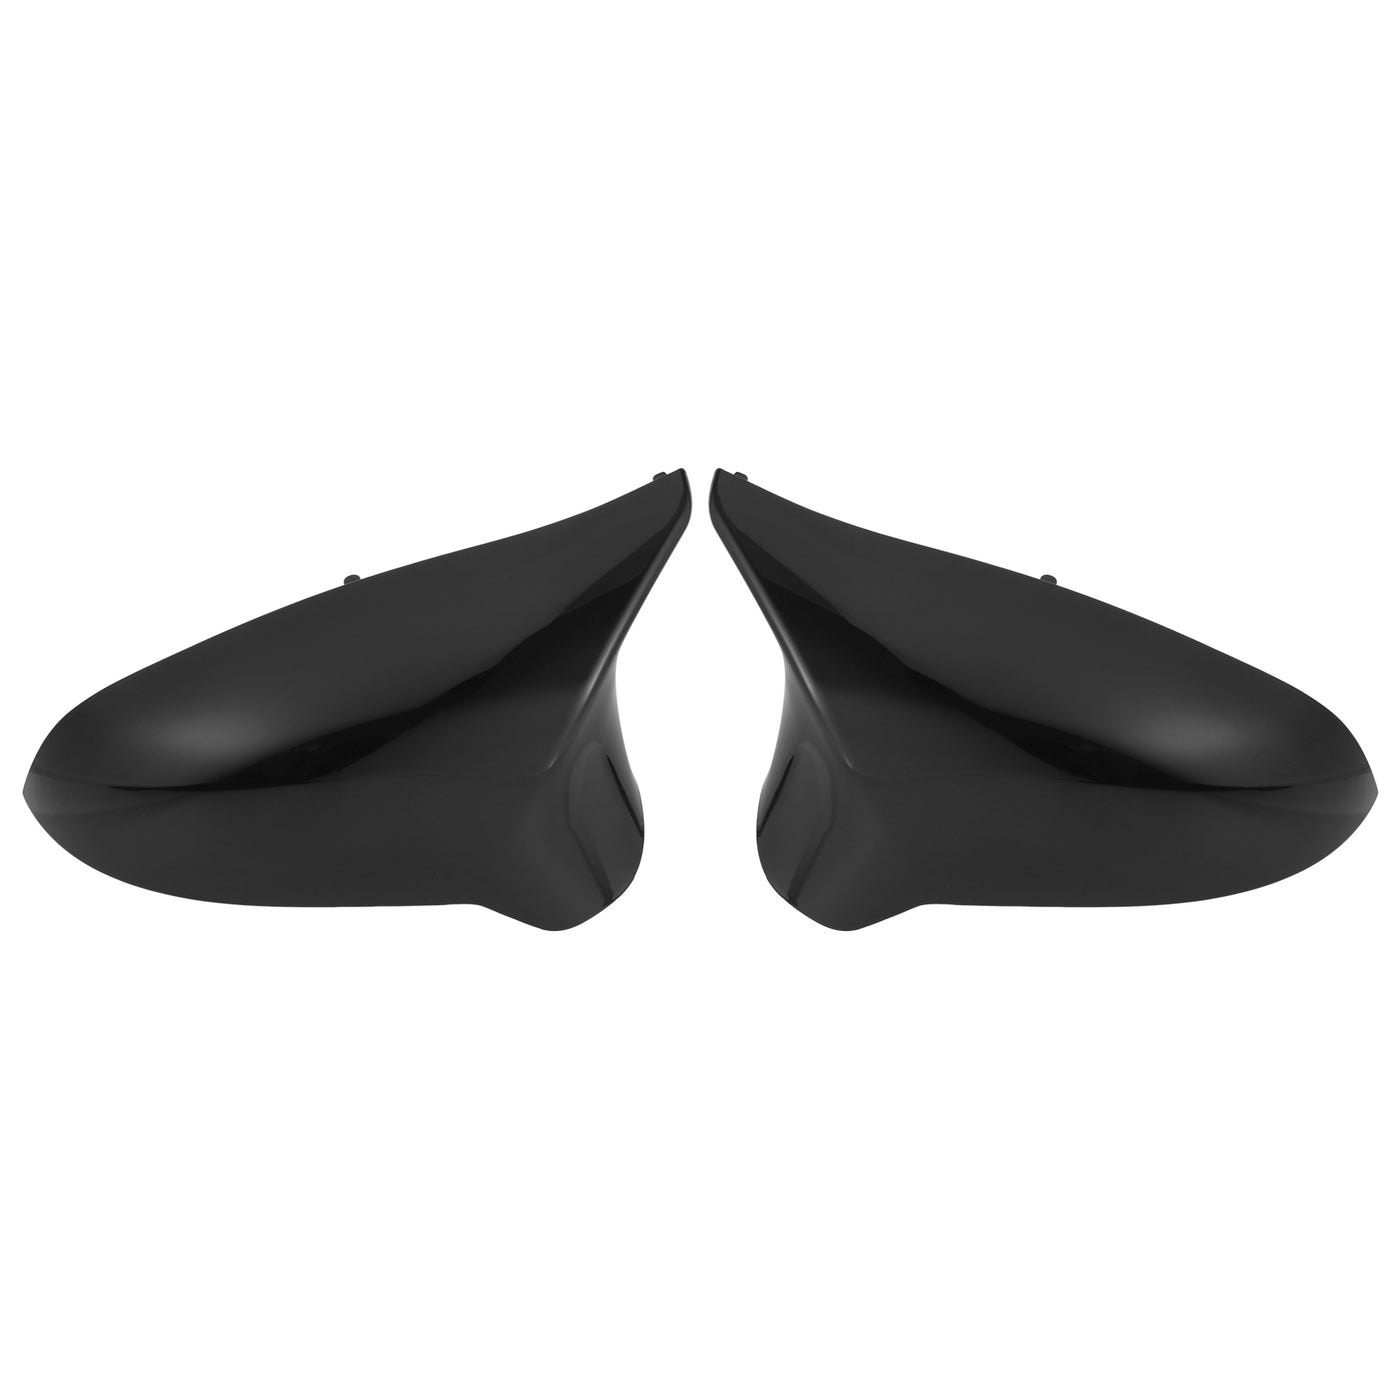 X AUTOHAUX Pair Exterior Rear View Mirror Housing Door Wing Mirror Cover Cap Glossy Black for BMW F80 M3 F82 M4 Sedan Coupe Convertible 2015-2019